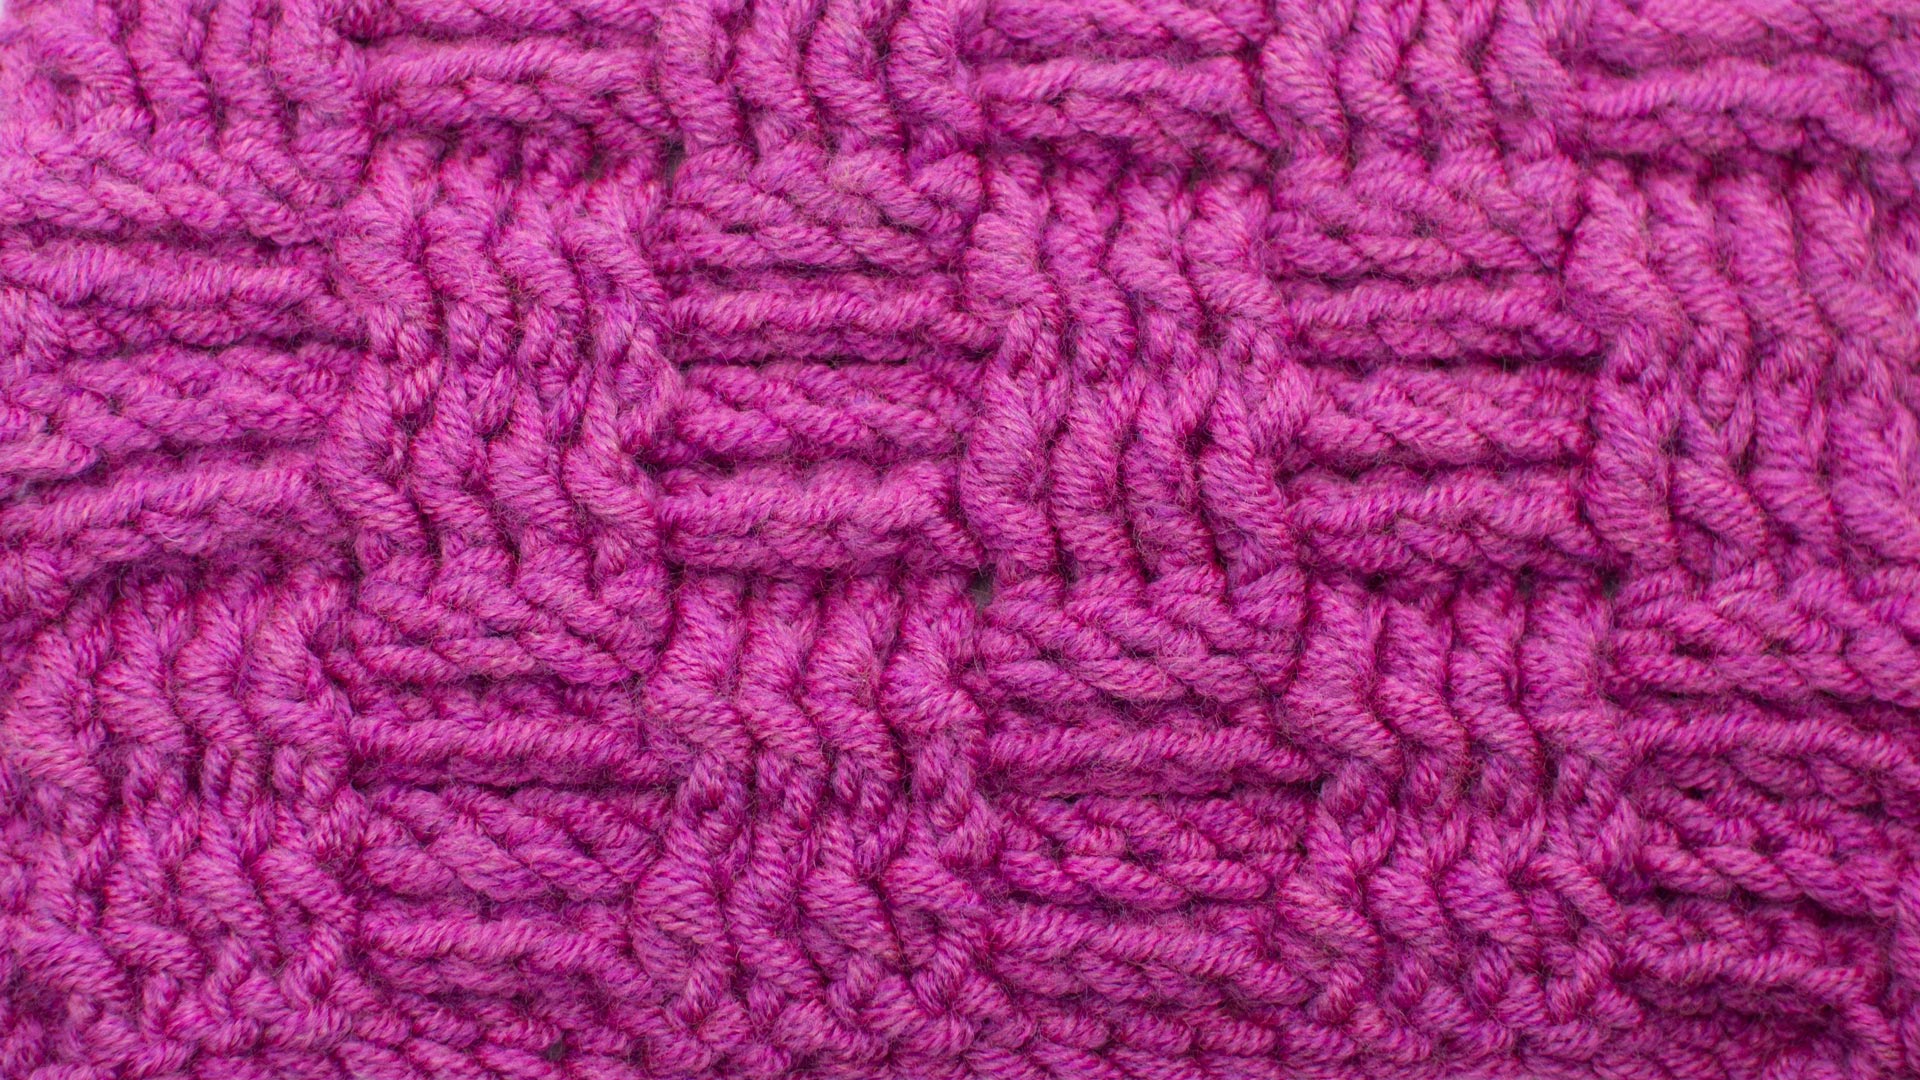 How To Crochet The Basket Weave Stitch – Plus Free Pattern! – The Snugglery